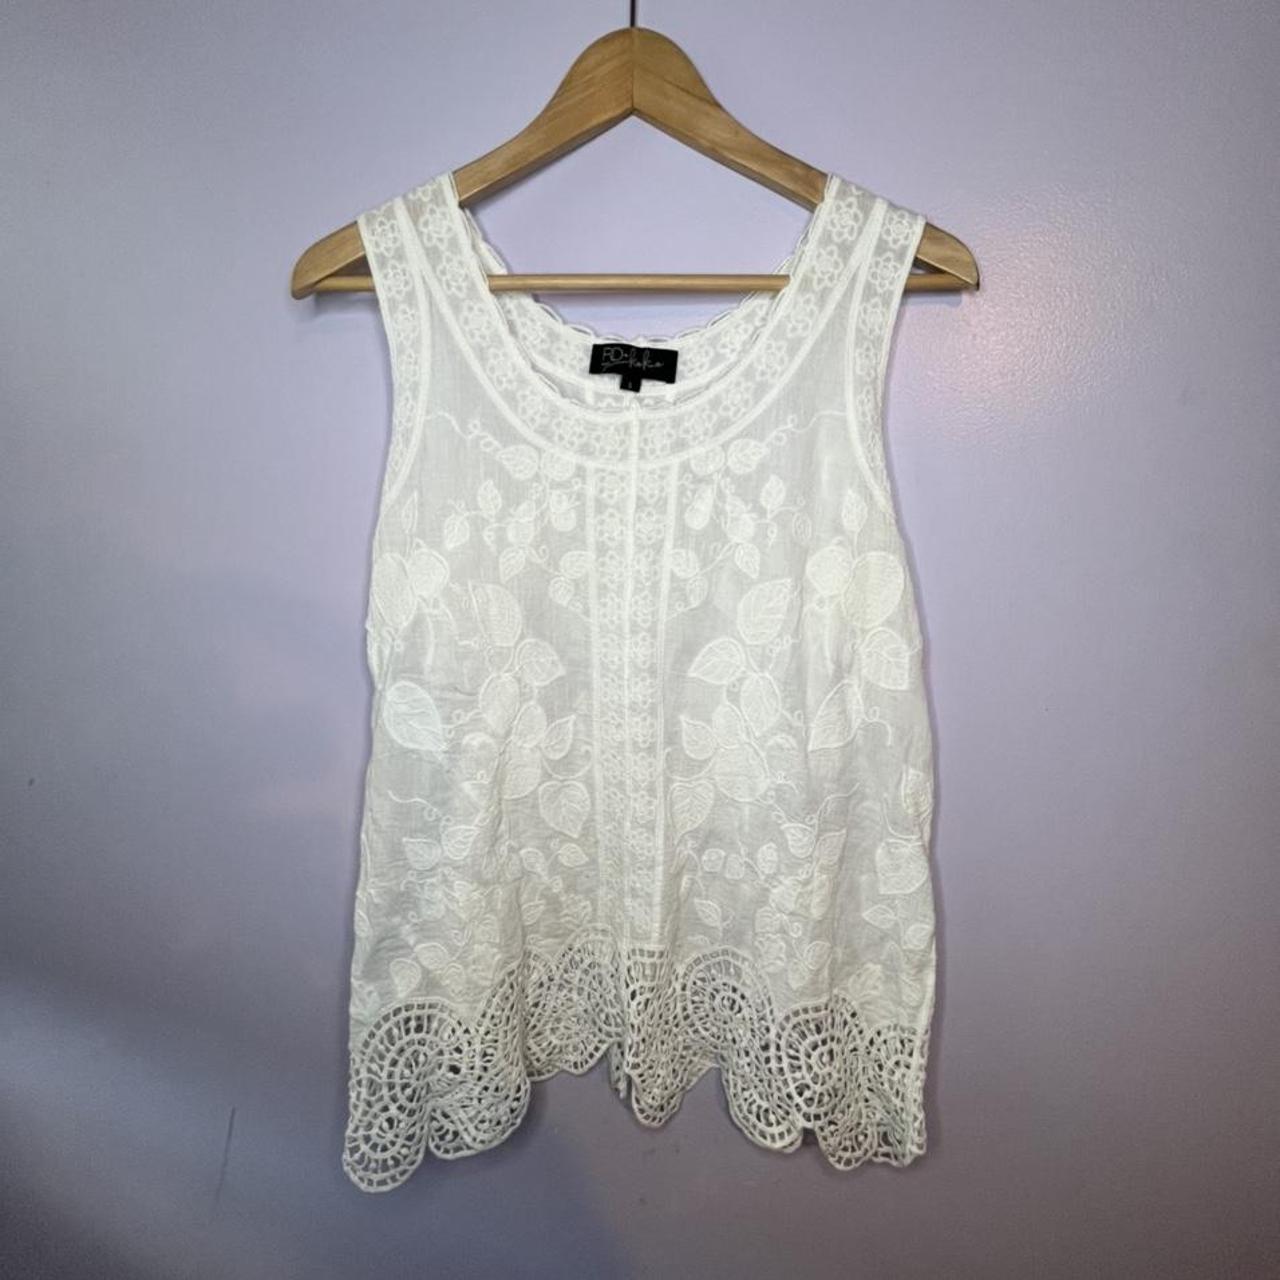 Product Image 1 - Light weight cute top!